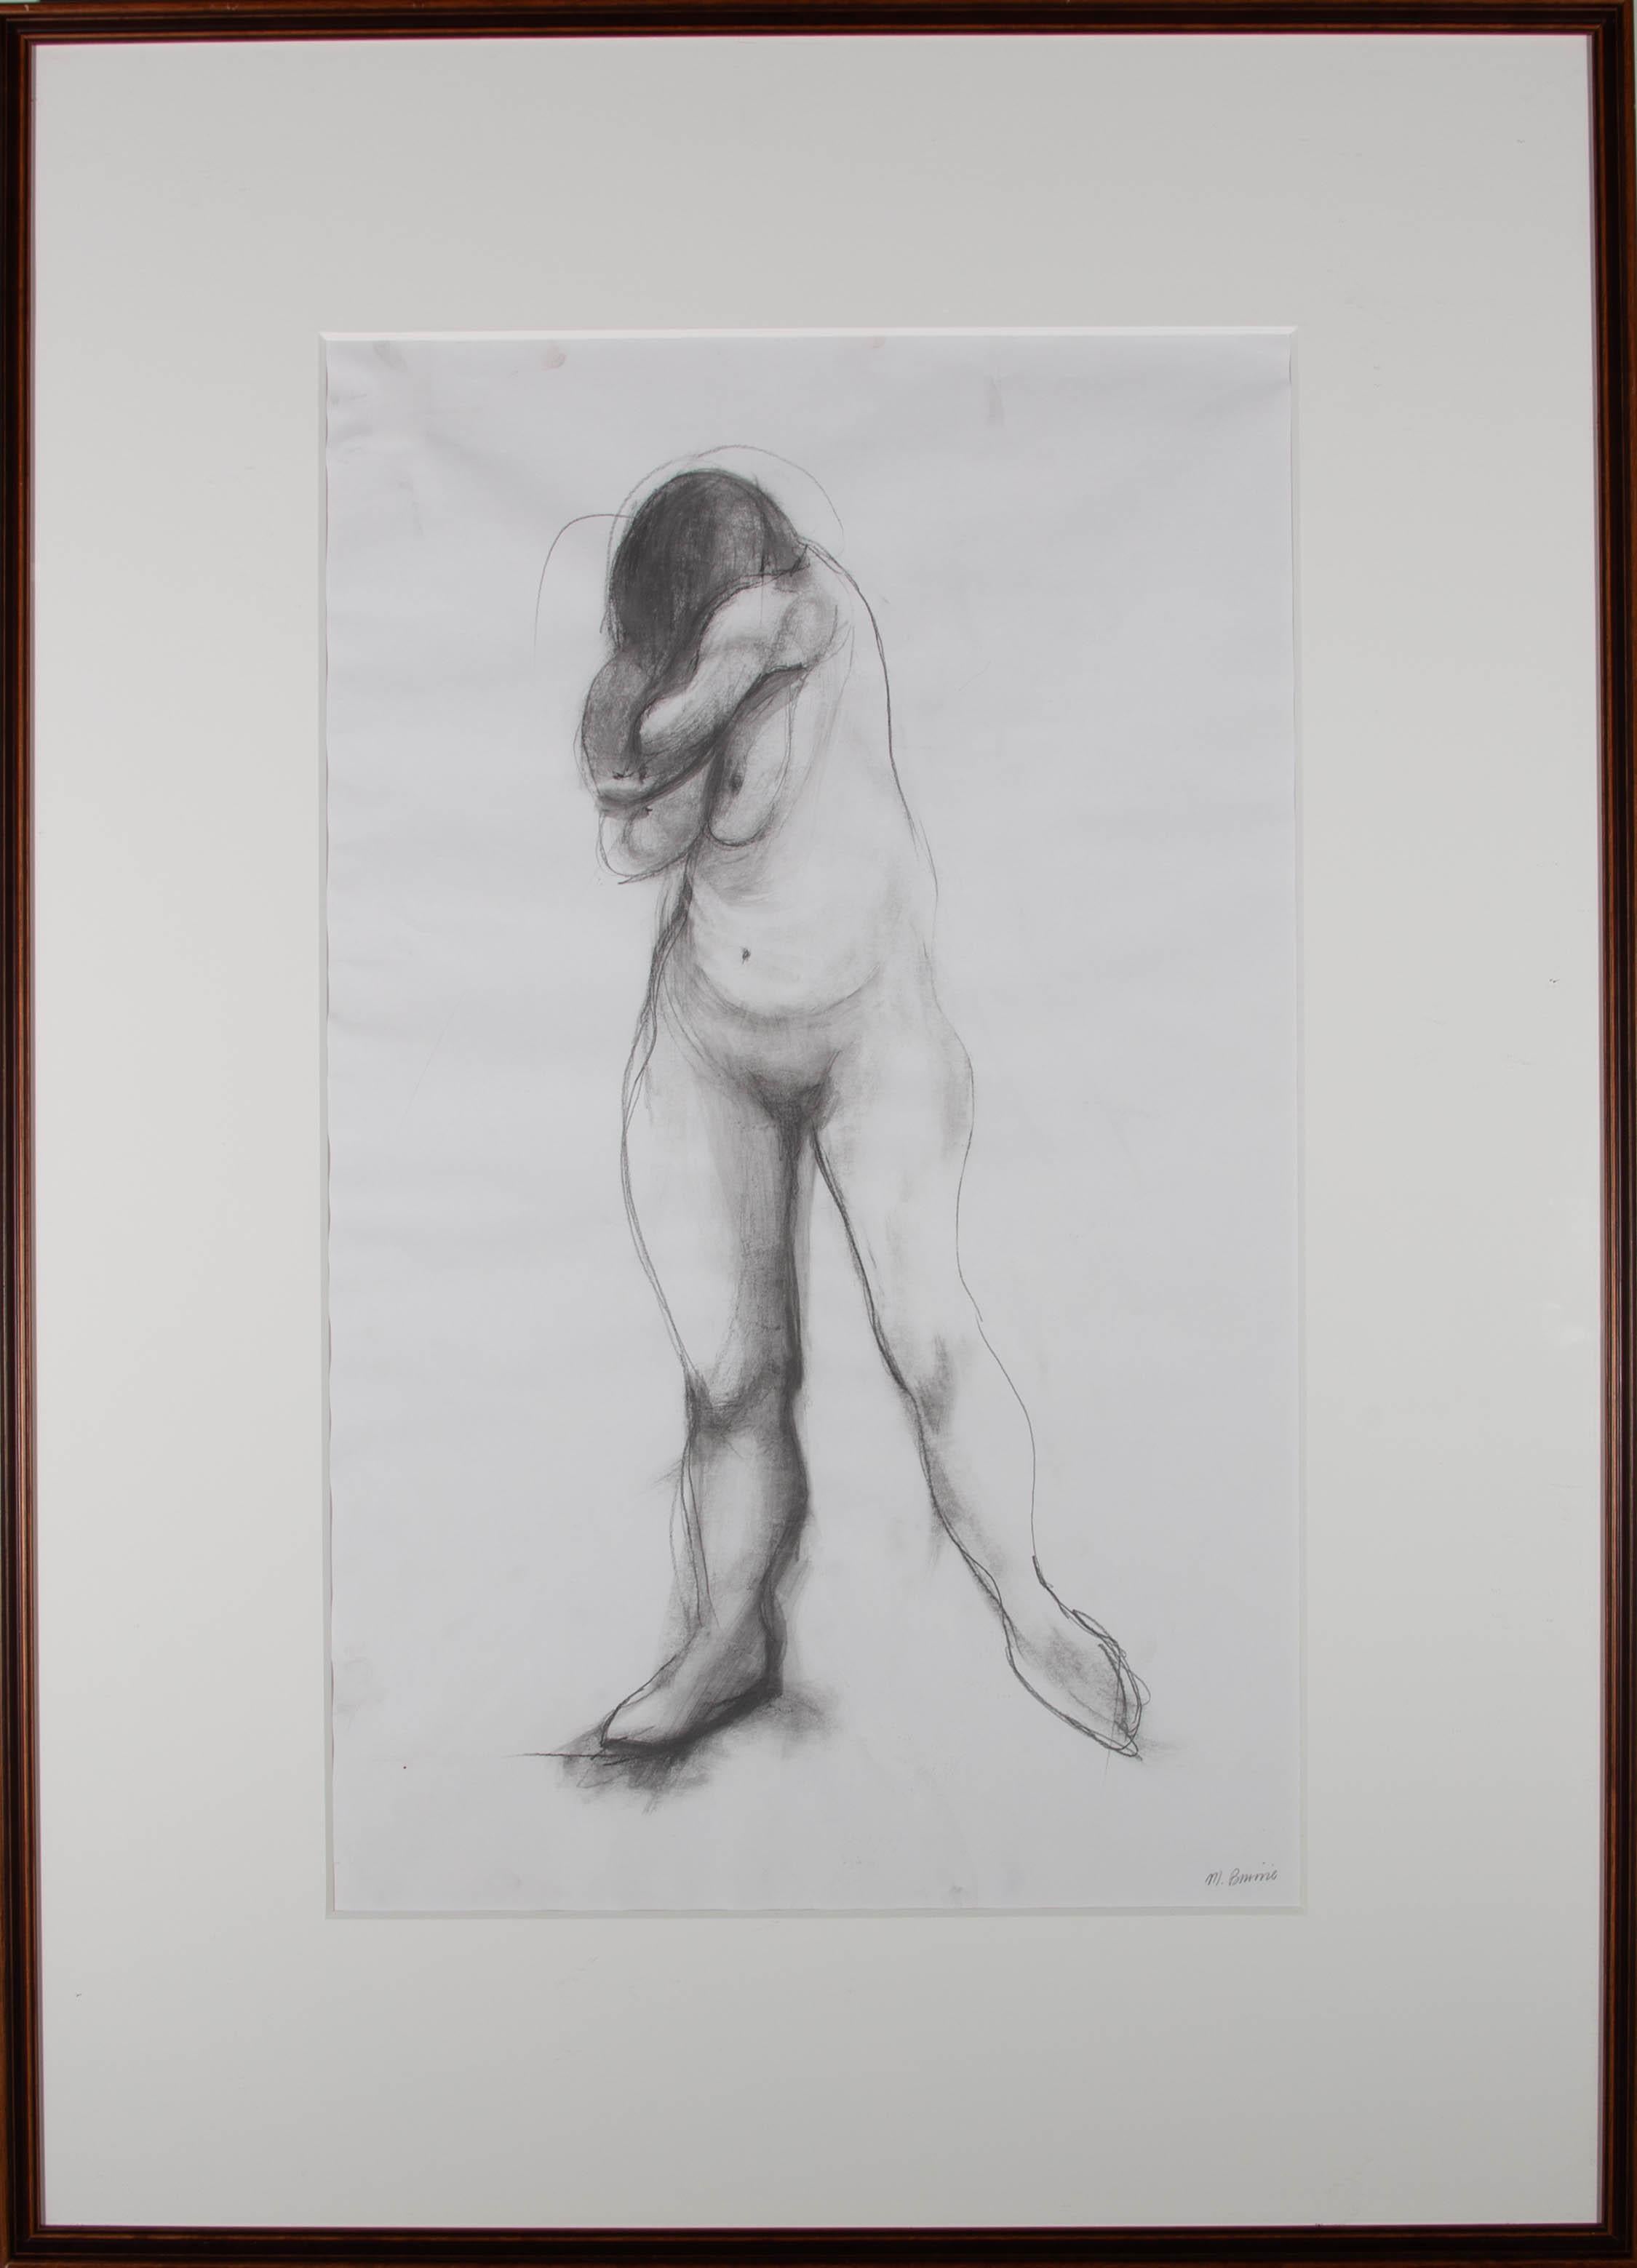 A striking nude study in graphite showing a woman with her head buried in her arms, hiding her face. The artist has signed to the lower right corner and the drawing has been presented in a simple wood frame with wide card mount. There is a label at